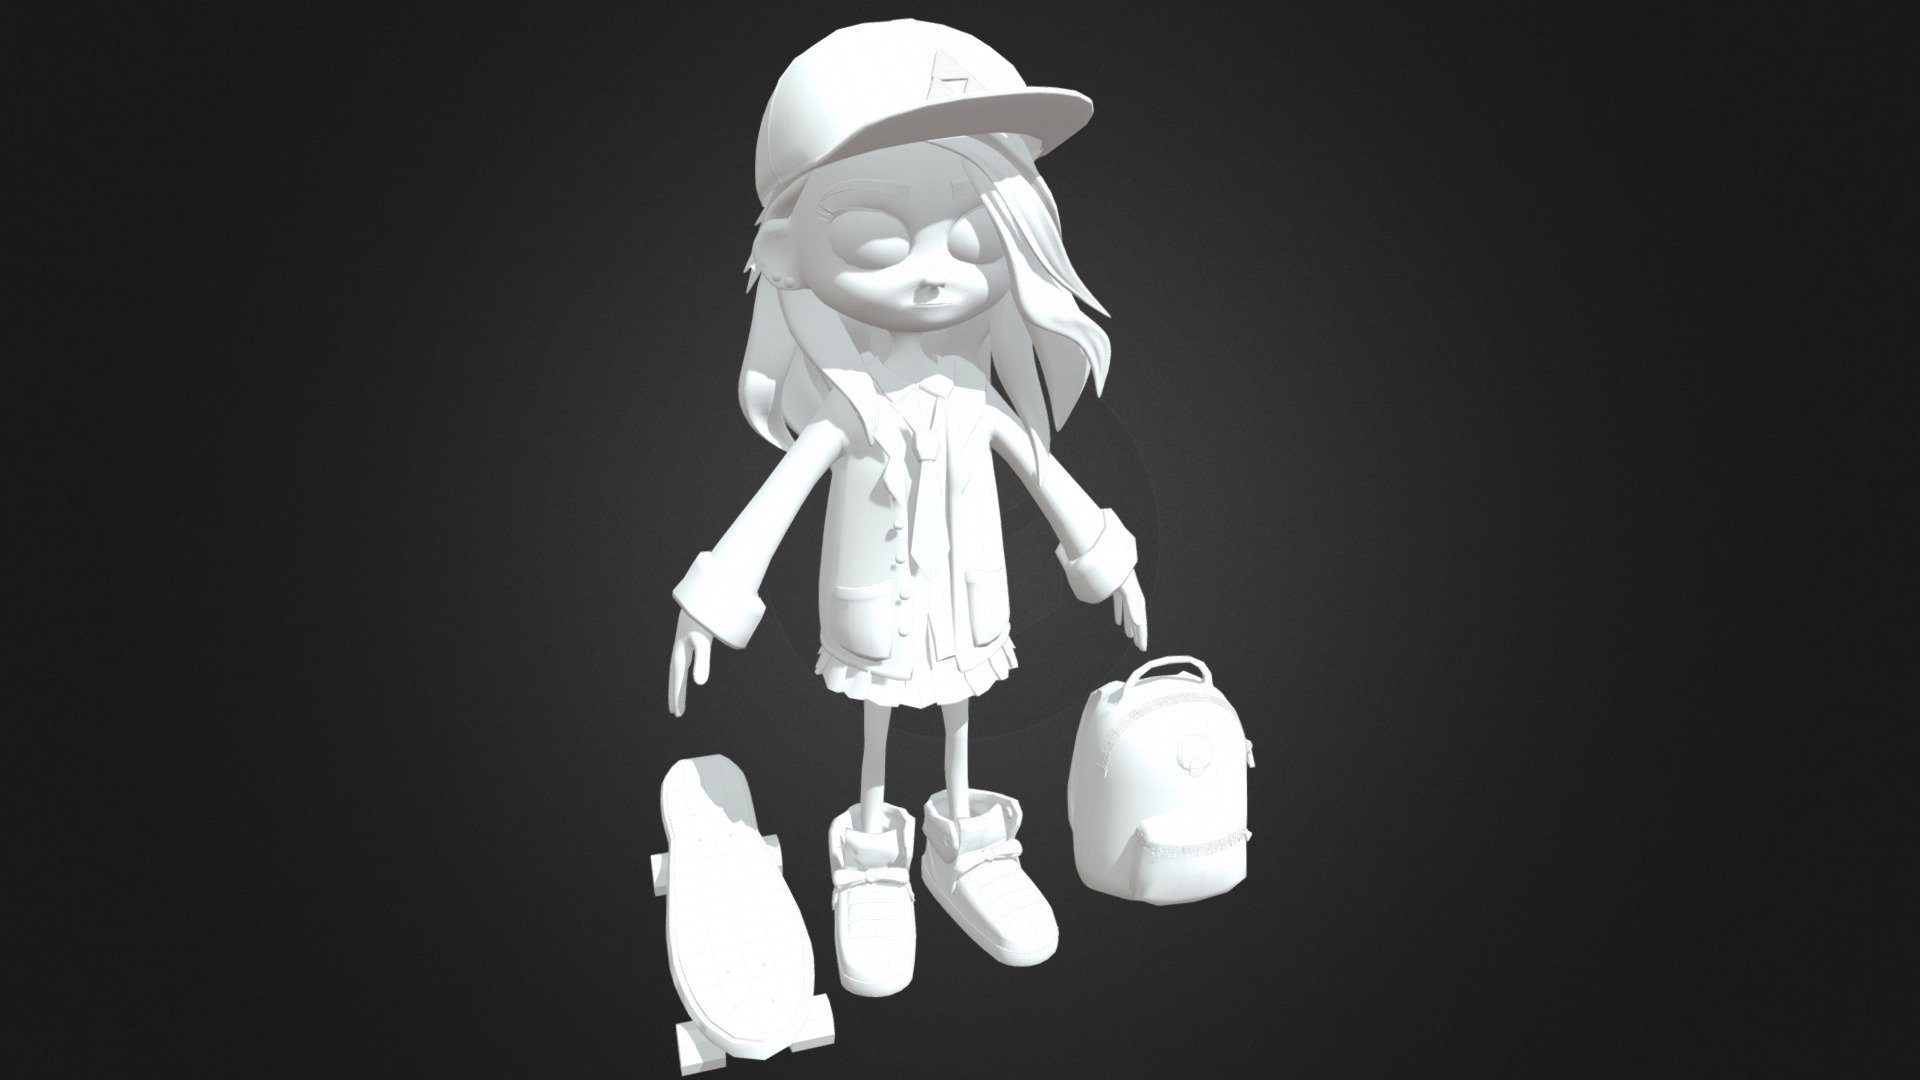 I started this new project of making a cartoon character! At the moment I created the basic low poly mesh and added some details with zbrush. Soon I'll upload the final render with all the textures, stay tunned

Project made in Animum Creativity Advanced school.

🖤 Visit all my links for more works: https://linktr.ee/yukitori - WIP Cartoon Character - Olivia 🛹 - 3D model by YukiTori 3d model